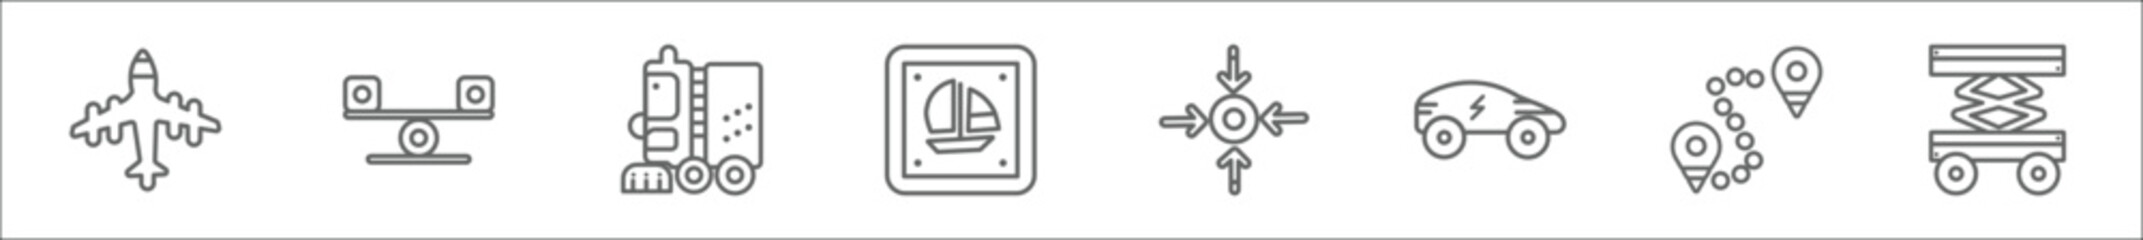 outline set of transport line icons. linear vector icons such as flying aeroplane top view, stability, road sweeper, sailing boat, movement, hybrid car, way, lifter